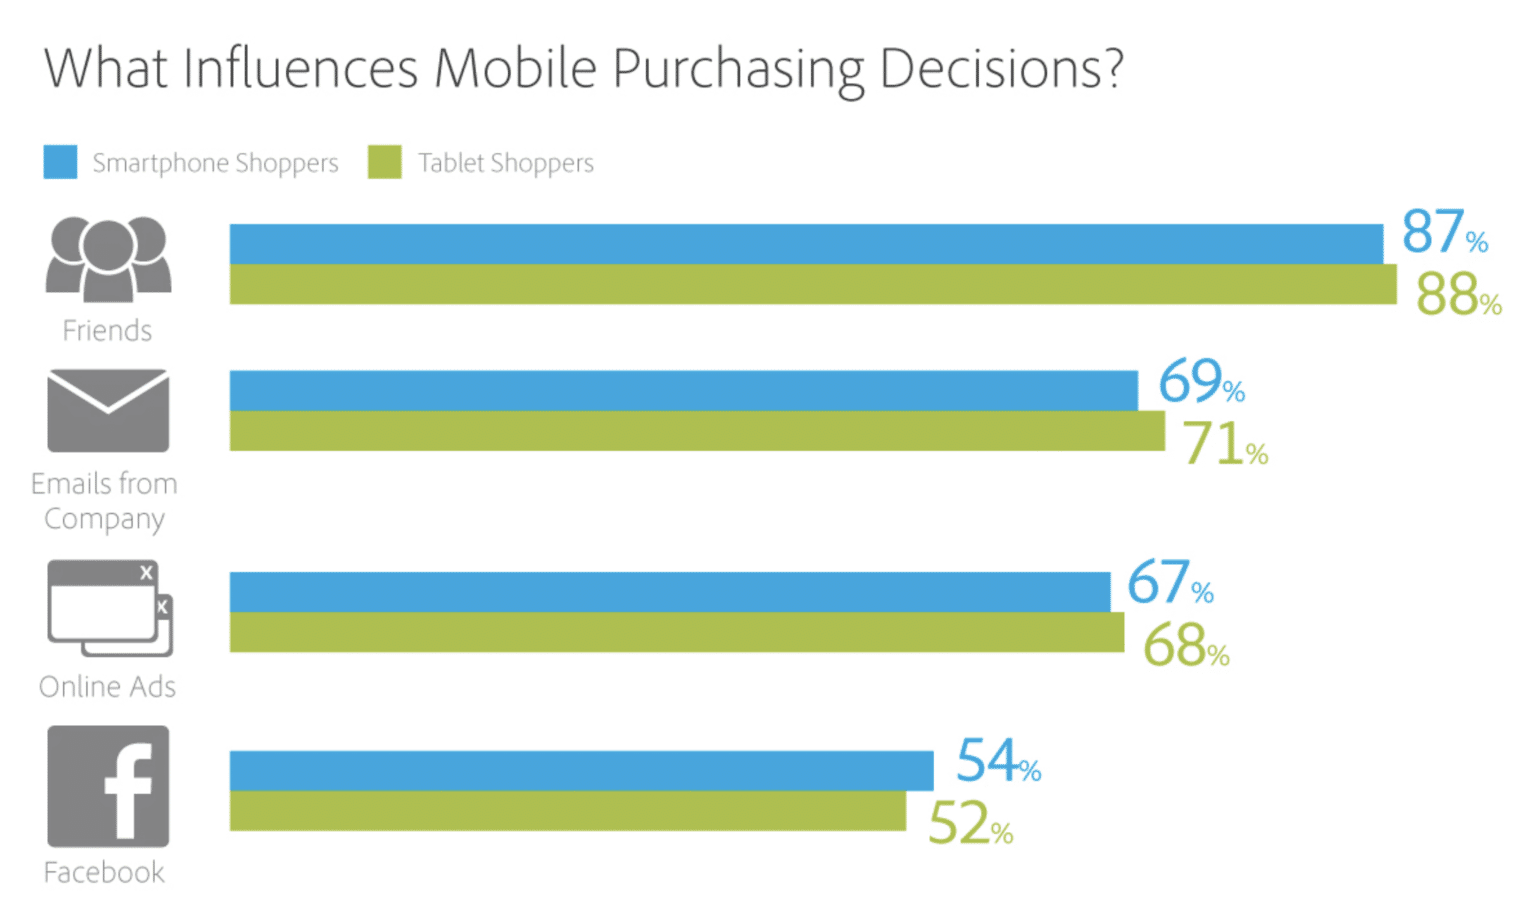 What influences mobile purchasing decisions